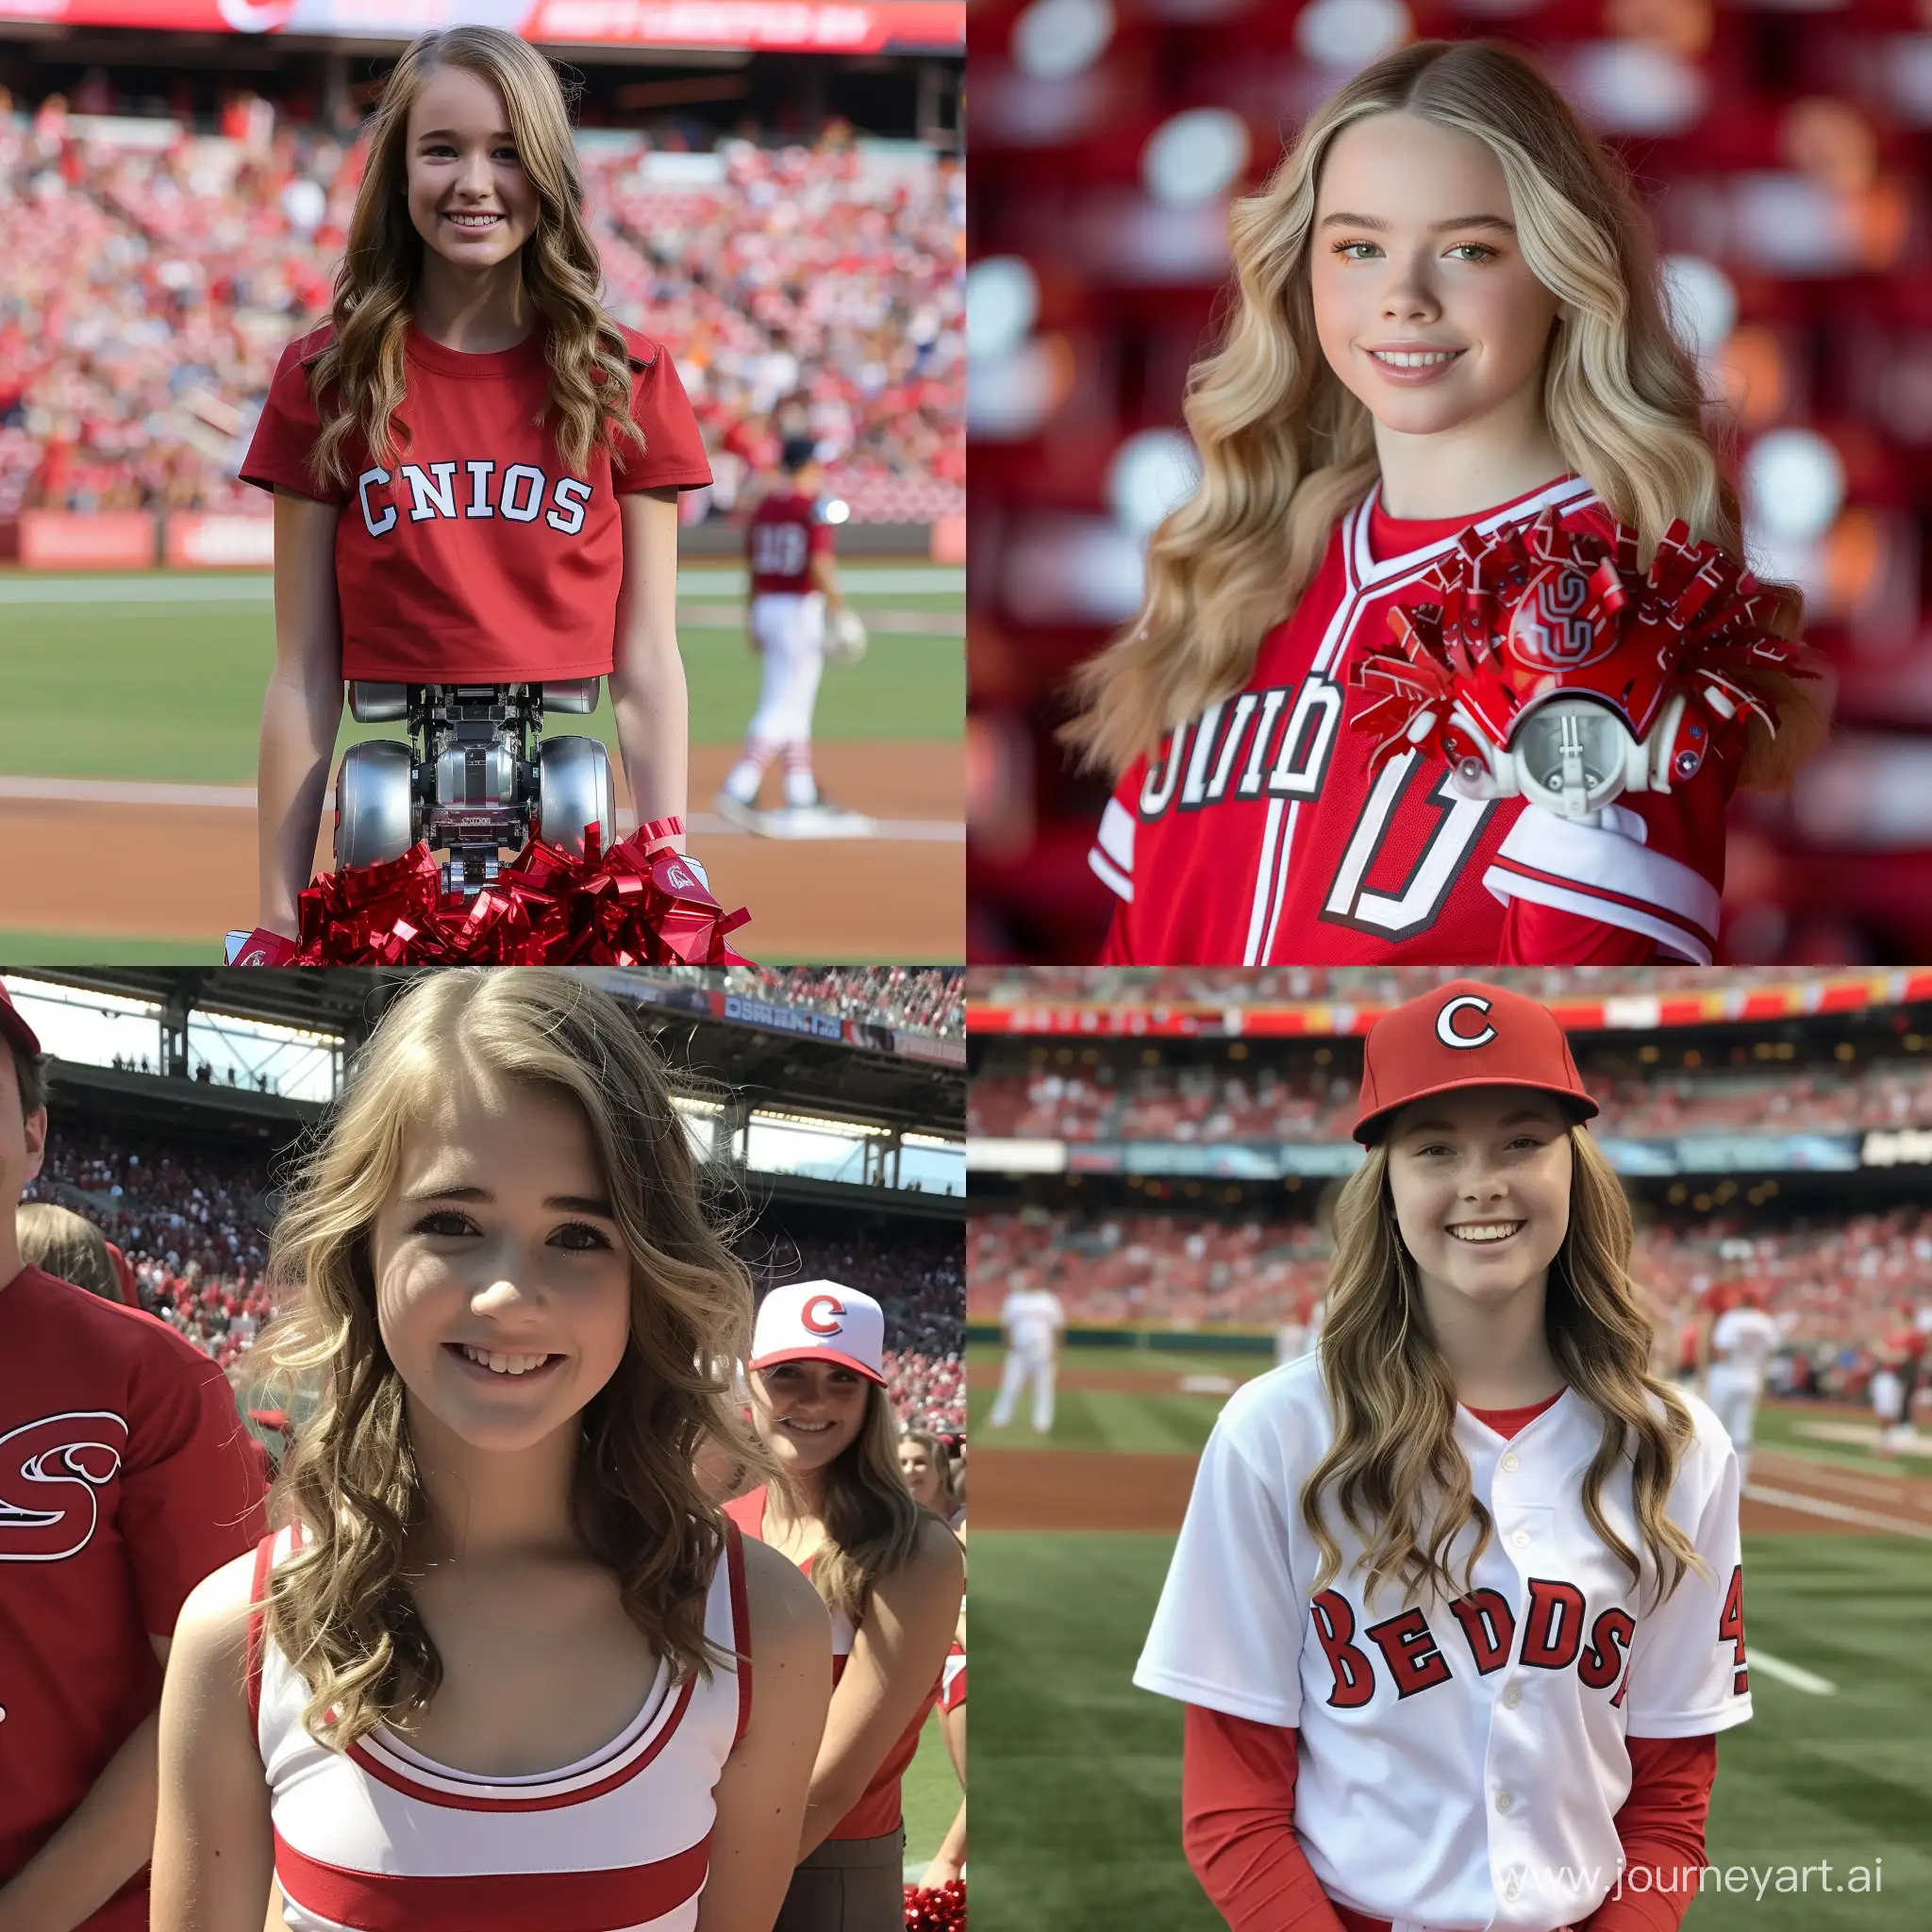 Cincinnati Reds 13-14 year old cheerleader, turns out to be a robot